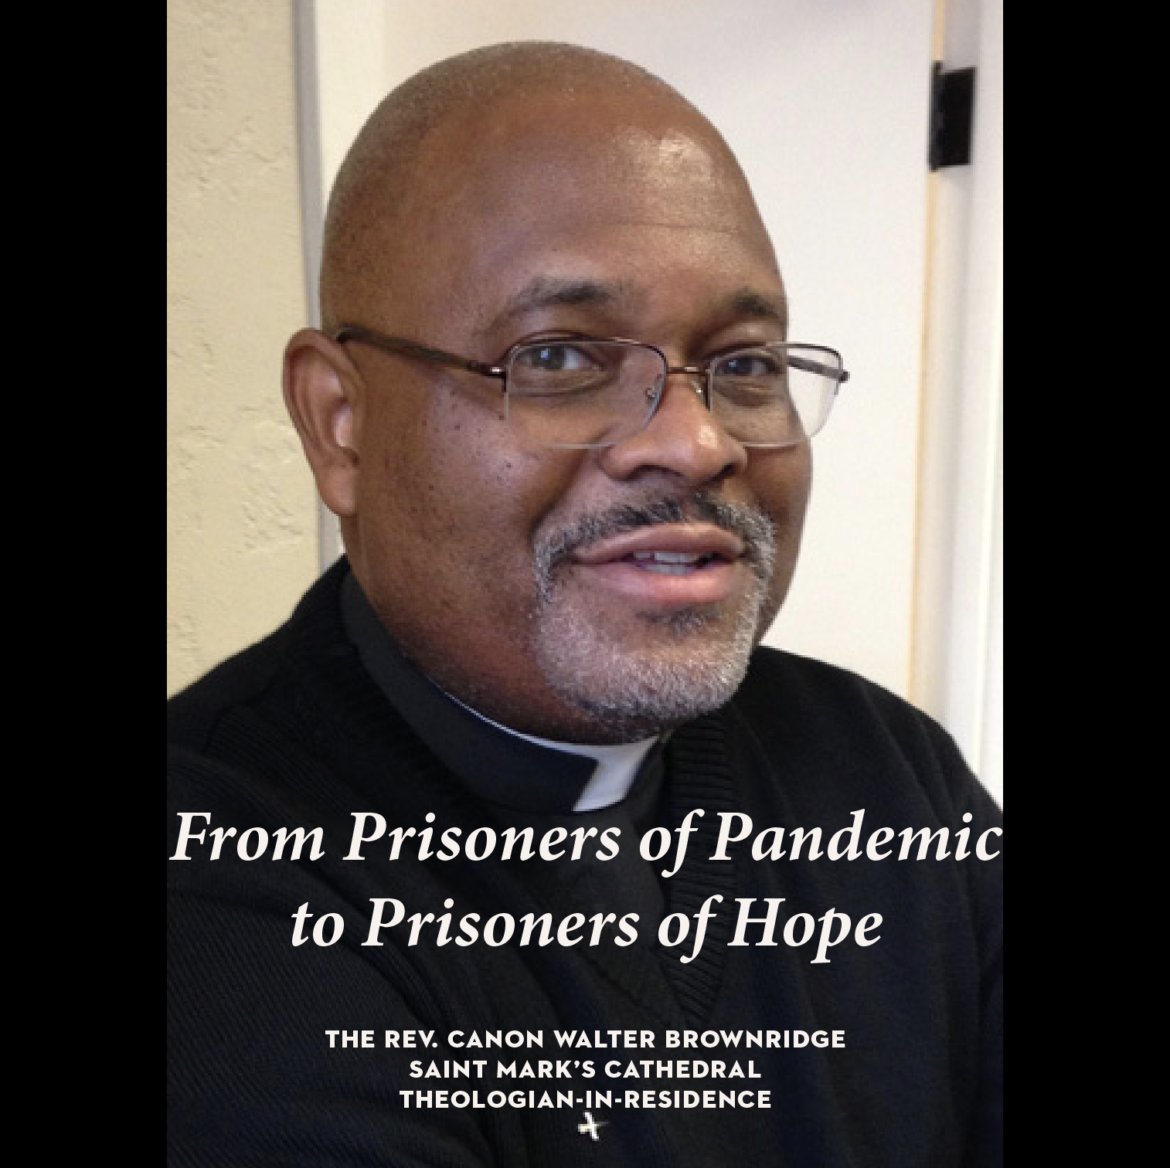 Canon Walter Brownridge presents: From Prisoners of Pandemic to Prisoners of Hope